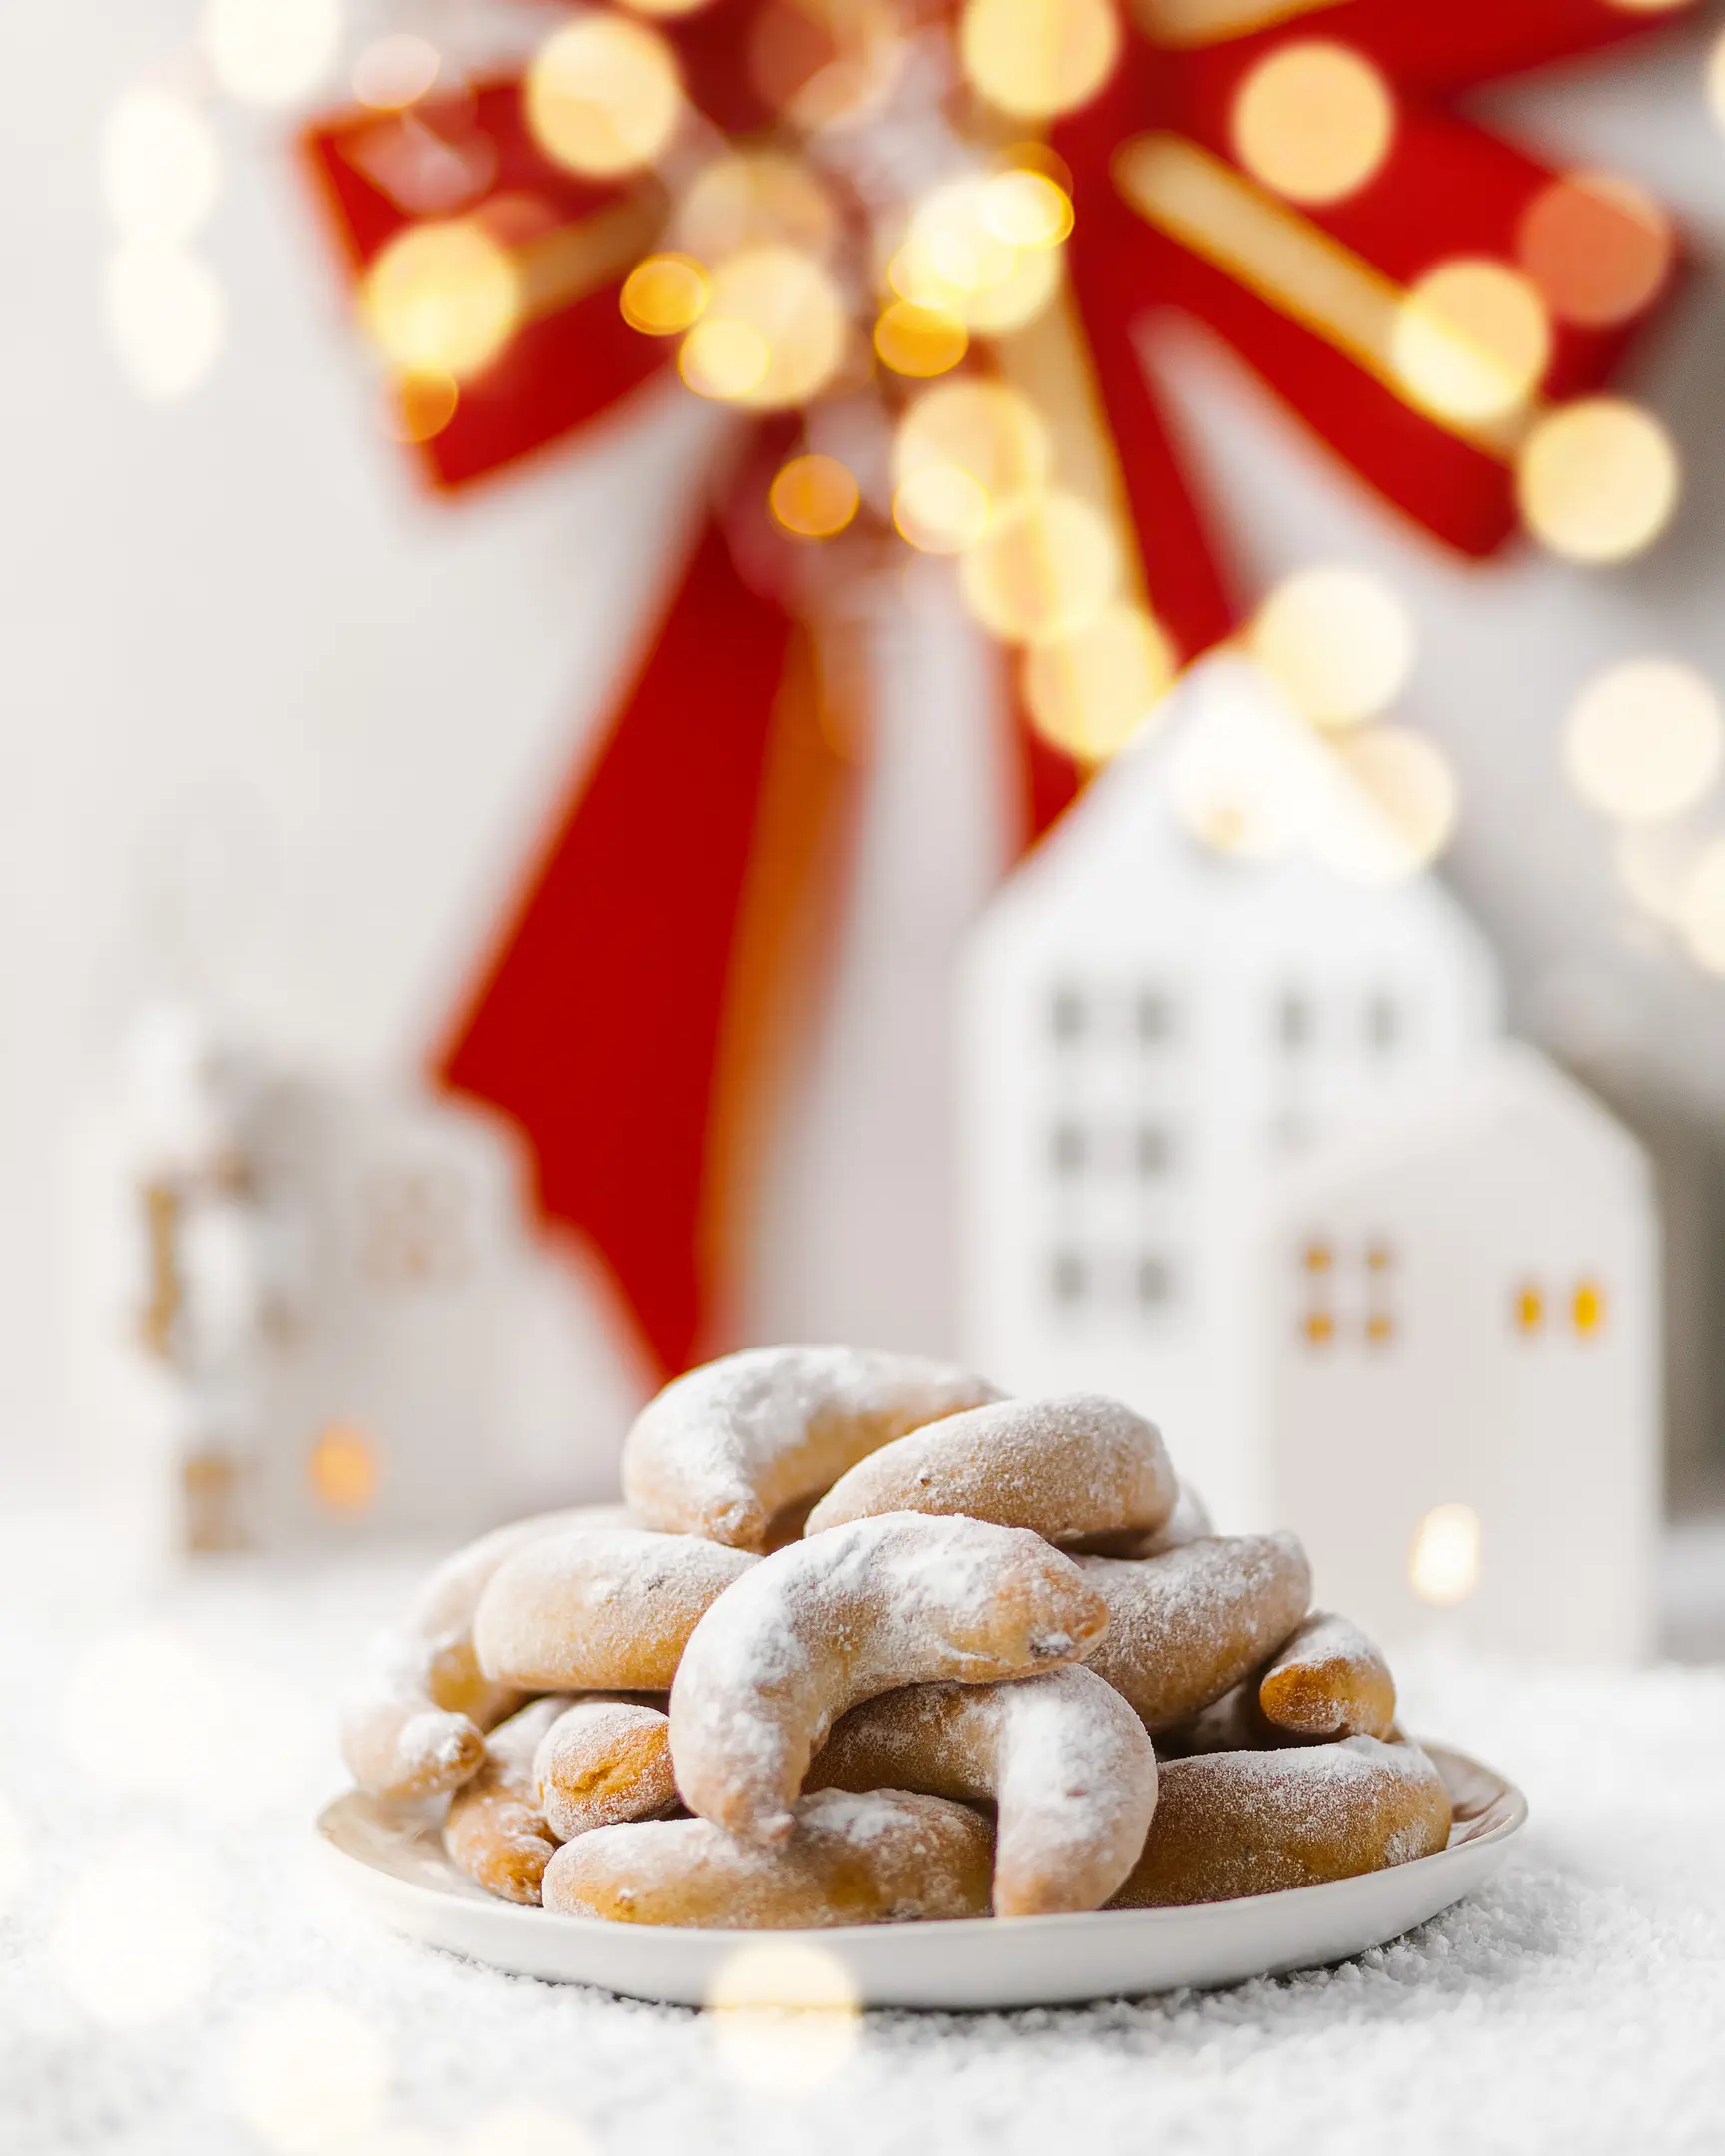 Сrescent-shaped cookies. On the table is a plate of crescent-shaped cookies. A red bow hangs on the wall in the background. Beautiful bokeh from the Christmas tree garland is visible in the frame. Next to the bow are ceramic houses.